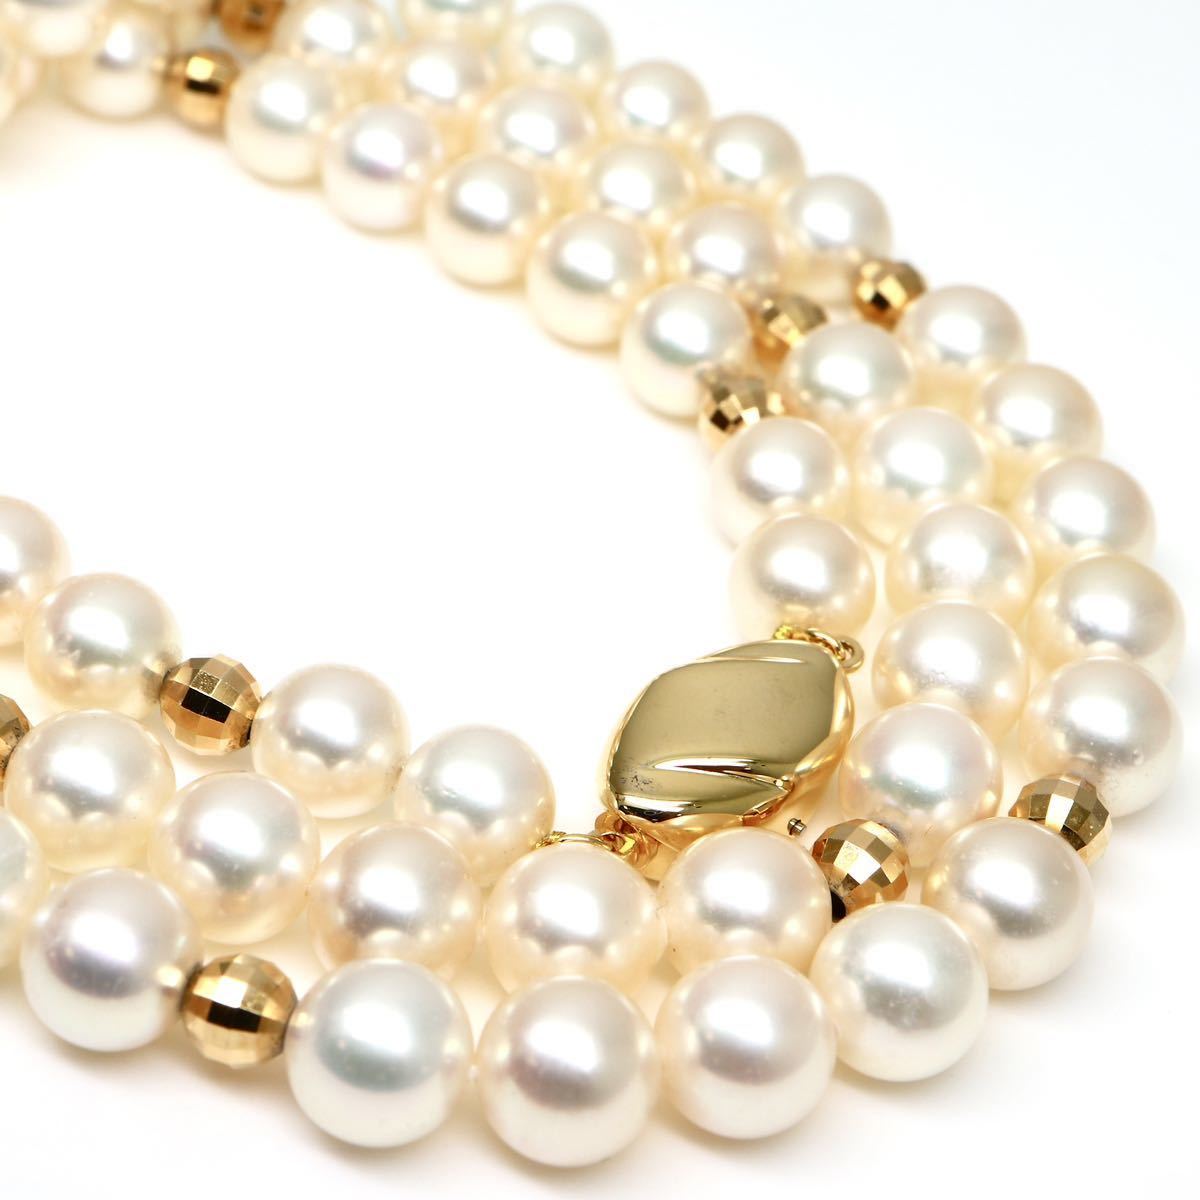 ◆K18/silverアコヤ本真珠ロングネックレス⑦◆F 約54.0g 約66.5cm 7.5-8.0.mm珠 pearl パール jewelry necklace ジュエリーEH0/ZZ_画像4